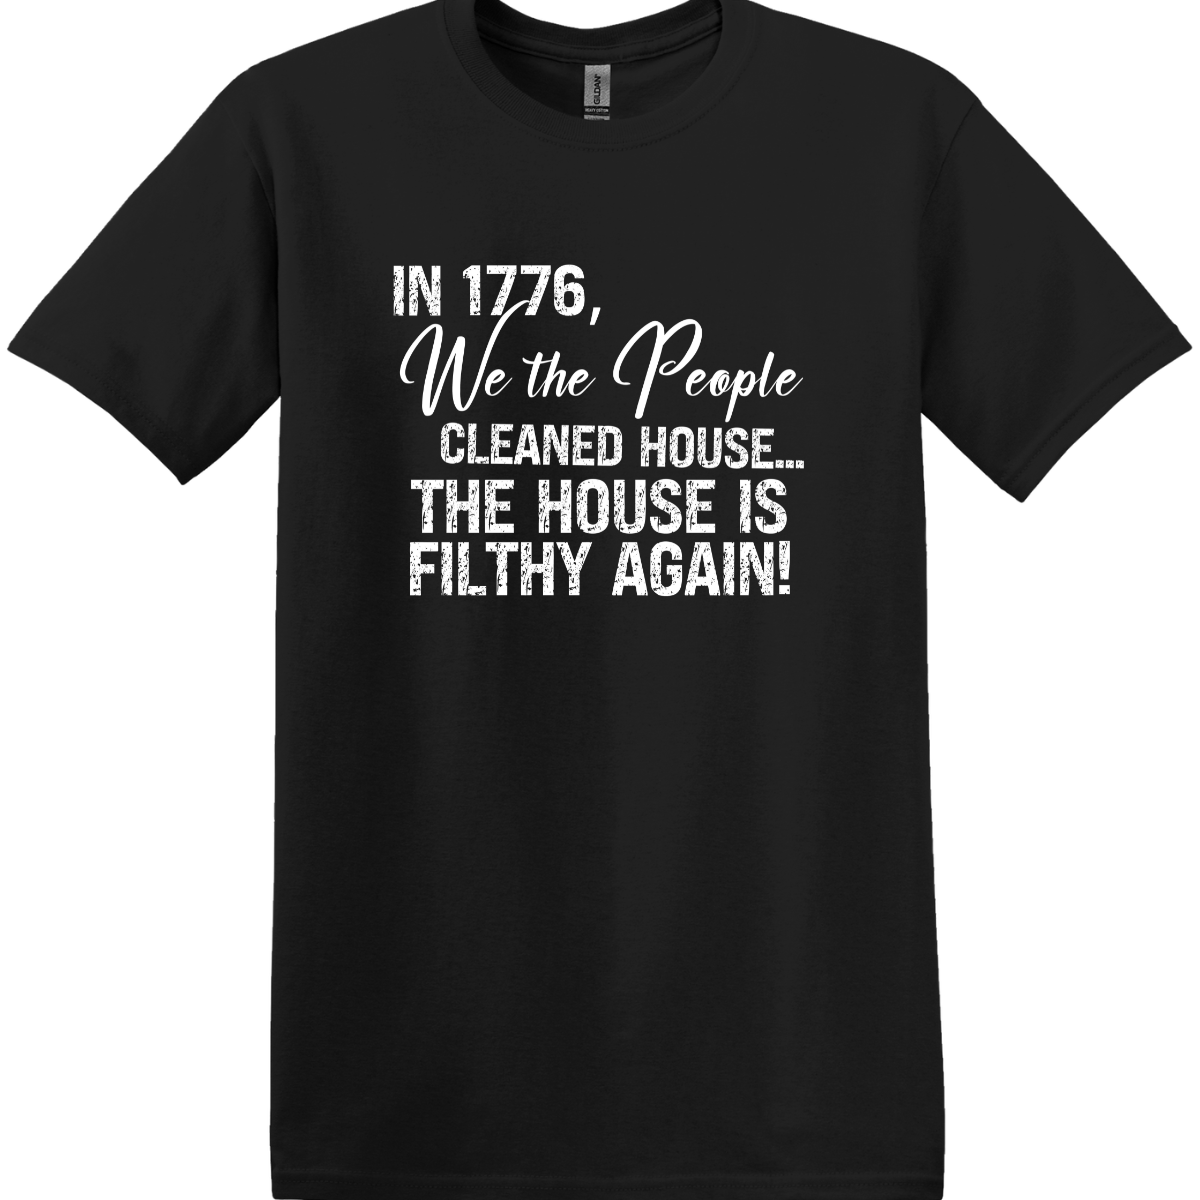 The House Is Filthy Again Tee